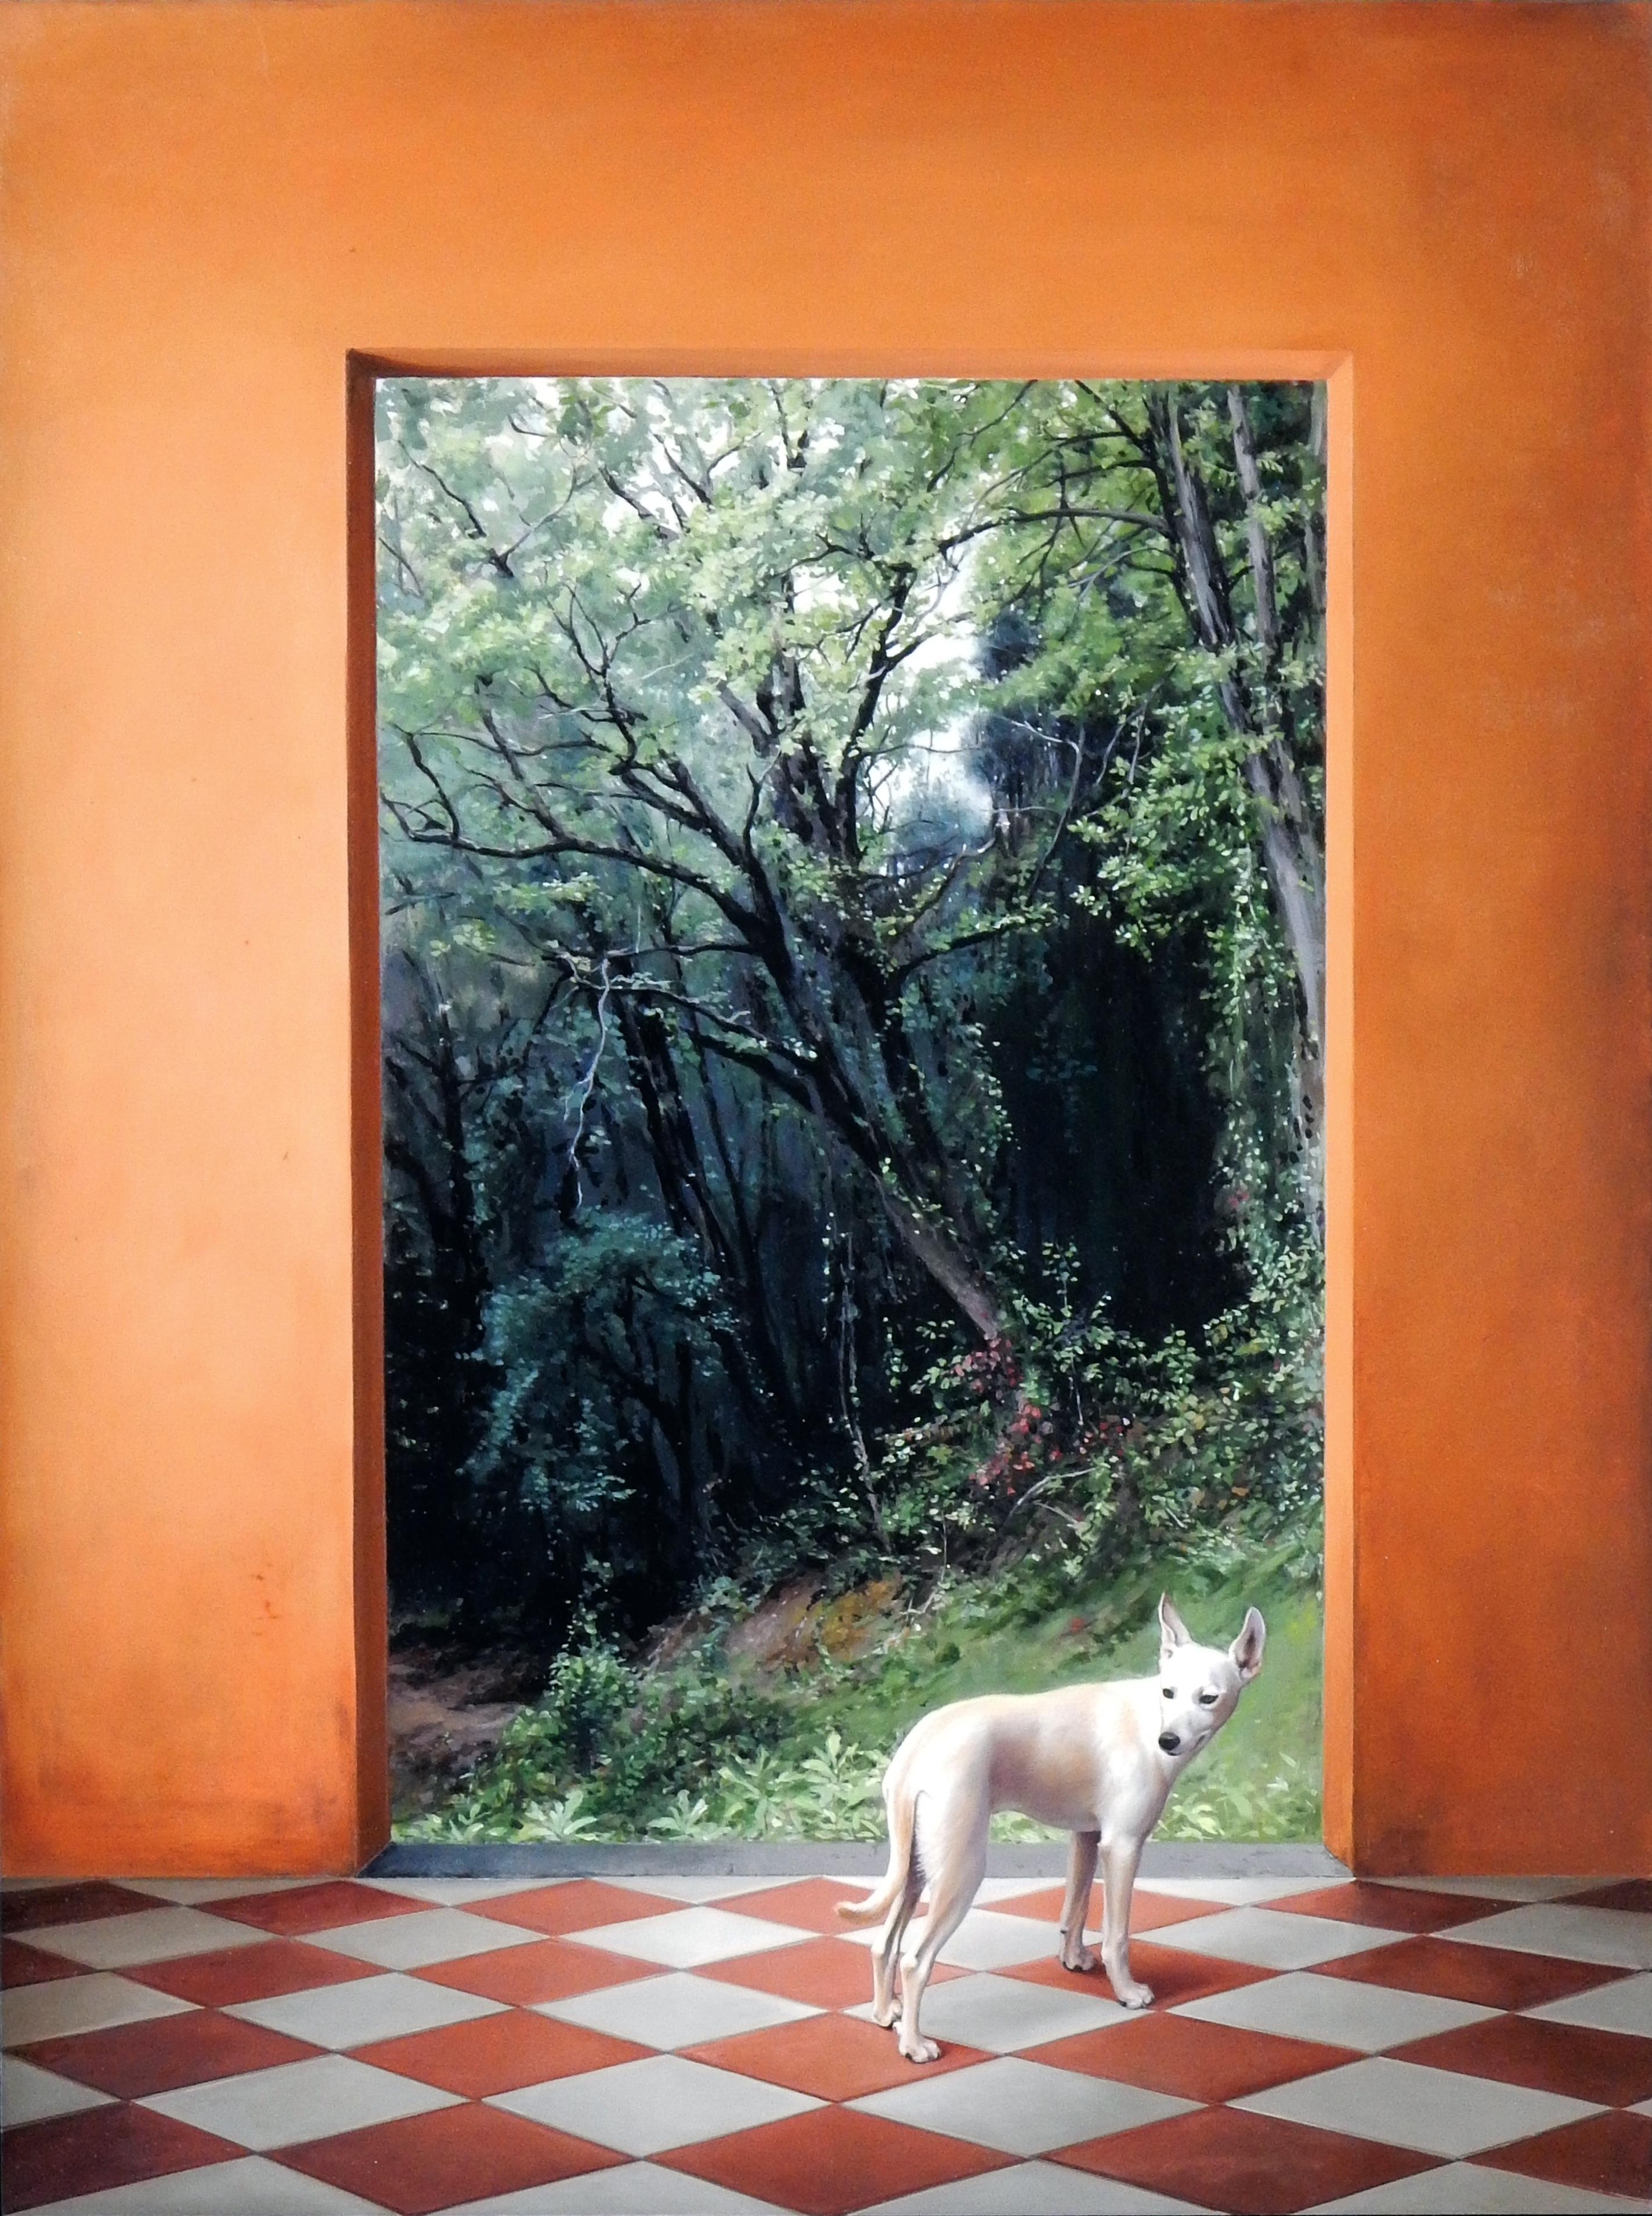 Carol Pylant Animal Painting - Ibizan Fall - Terra Cotta Colored Architectural Walls w/ Wooded Landscape & Dog